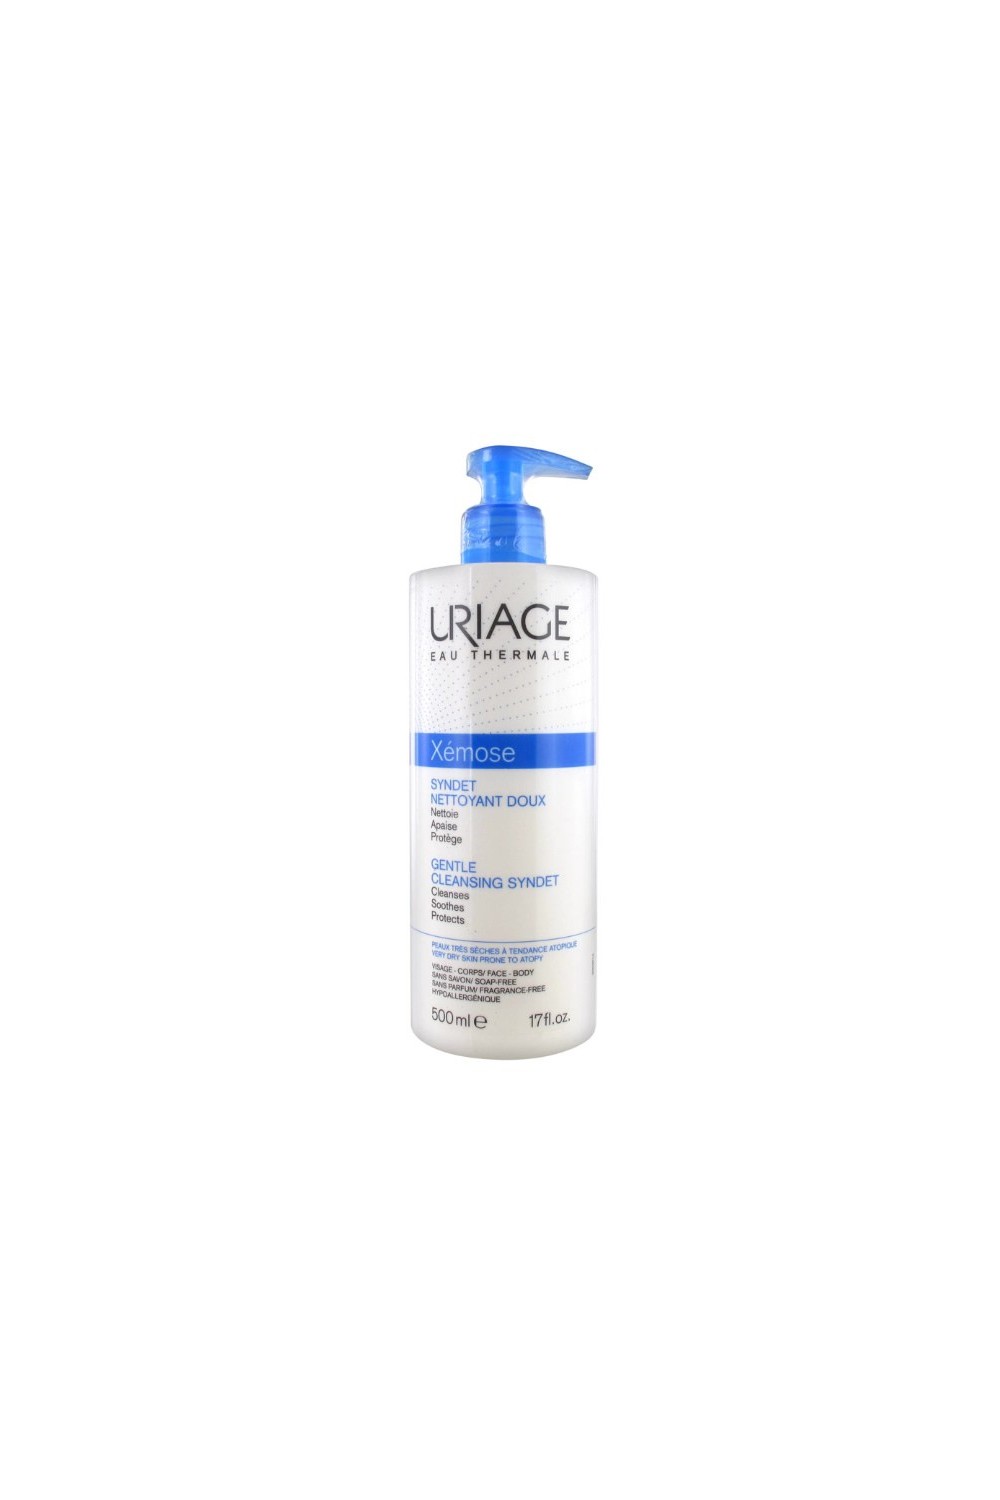 Uriage Xémose Syndet Gentle Cleansing 500ml